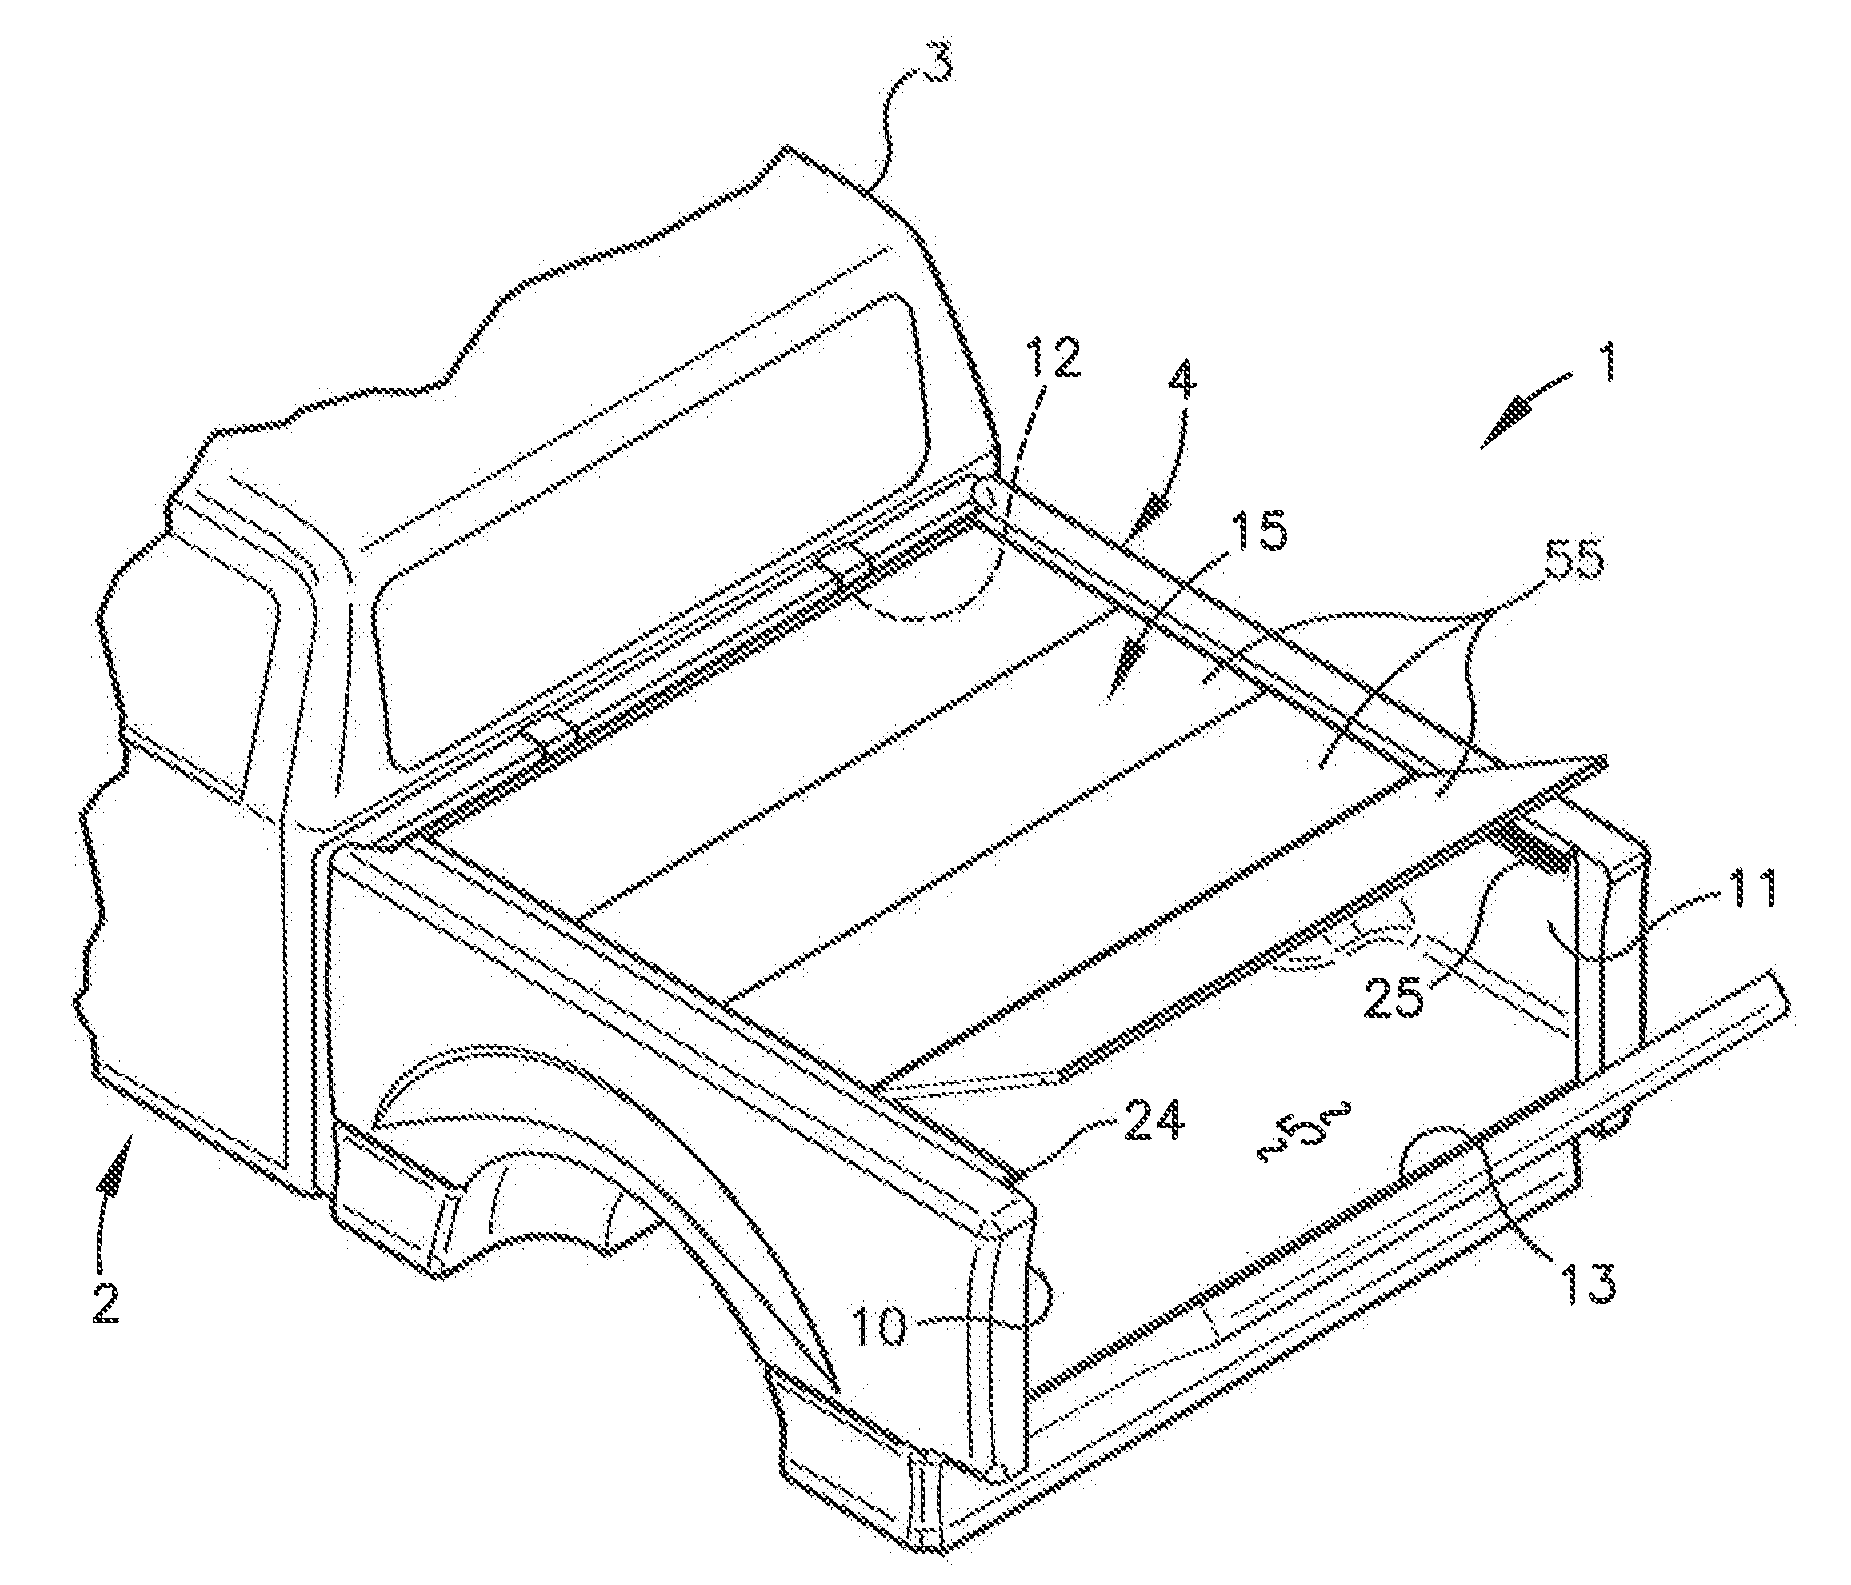 Vehicle bed cover system and storage assembly